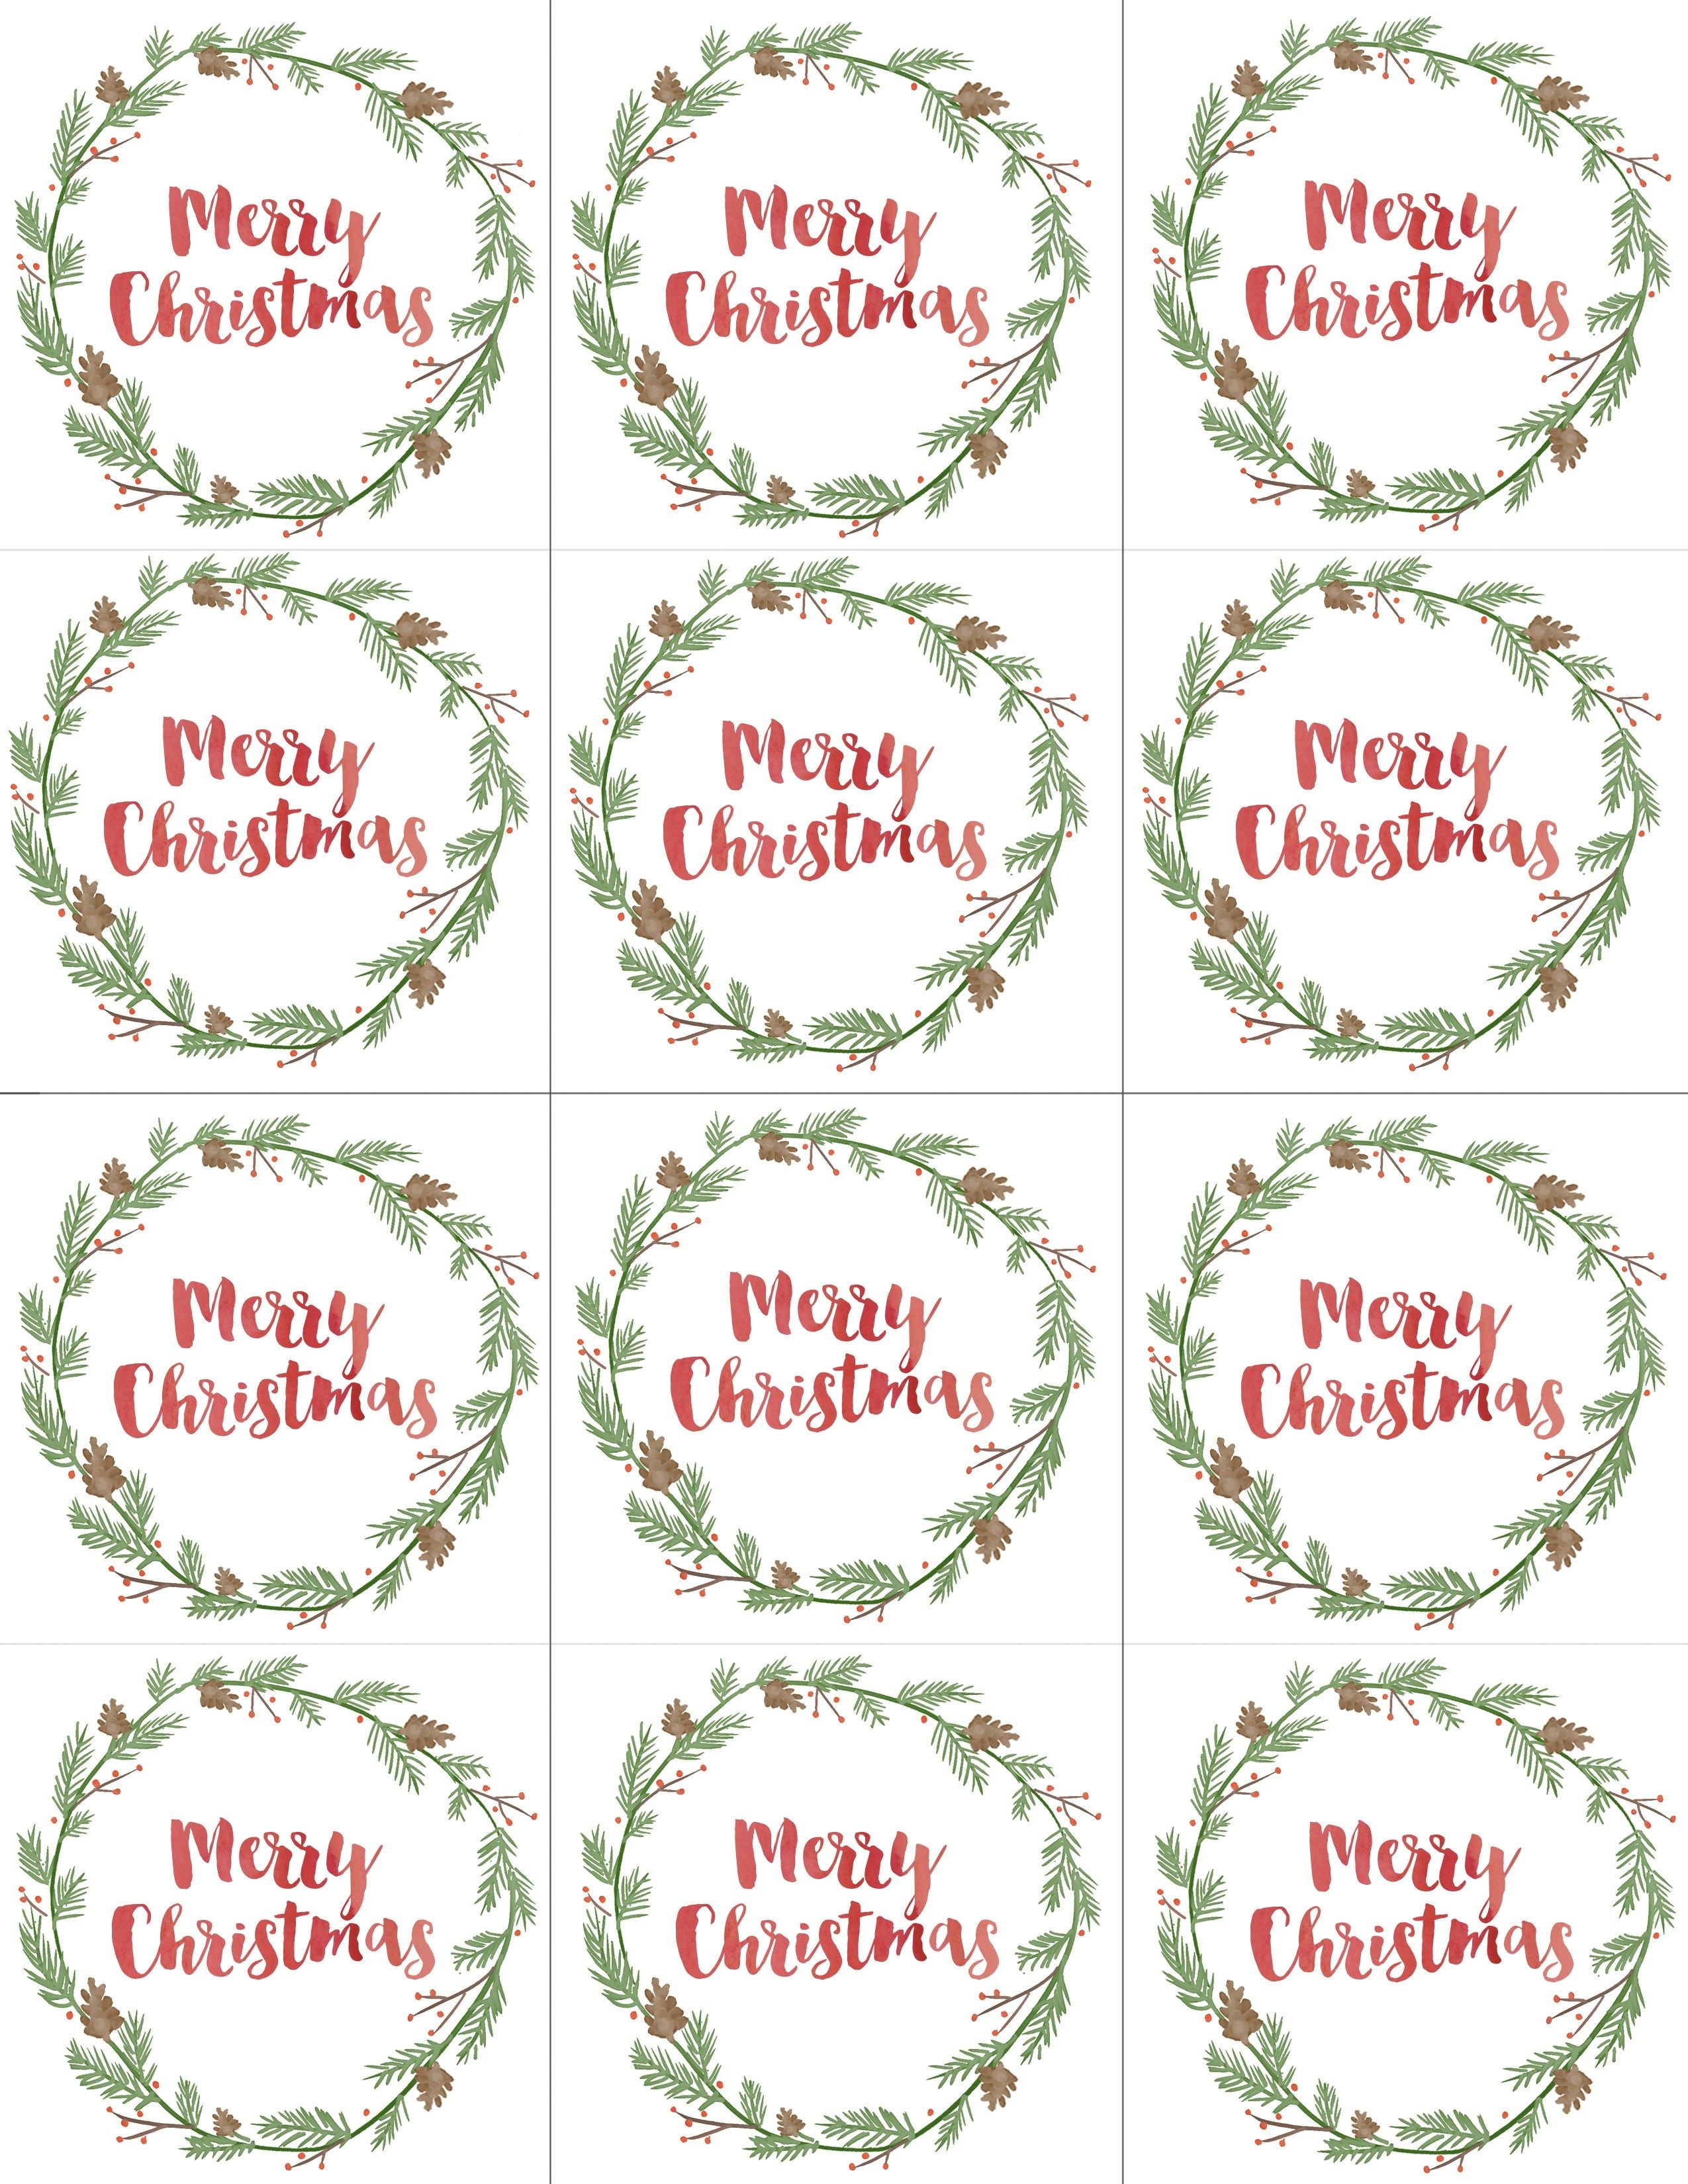 Hand Painted Gift Tags Free Printable | Christmas | Christmas Gift - Free Printable Christmas Tags